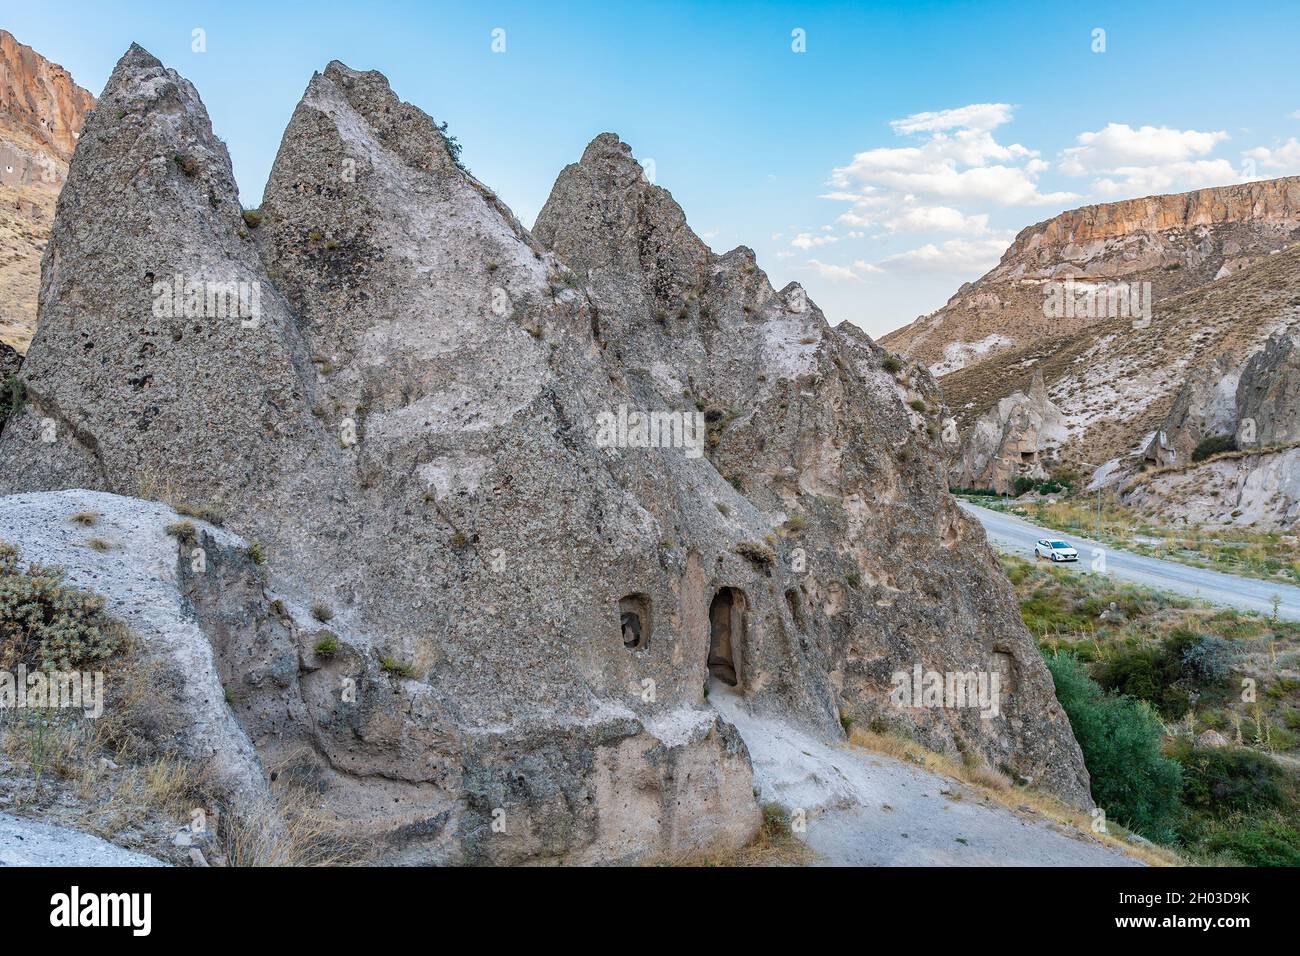 Soganli Valley Breathtaking Picturesque View of Rock-Cut Houses and Cloisters on a Blue Sky Day in Summer Stock Photo